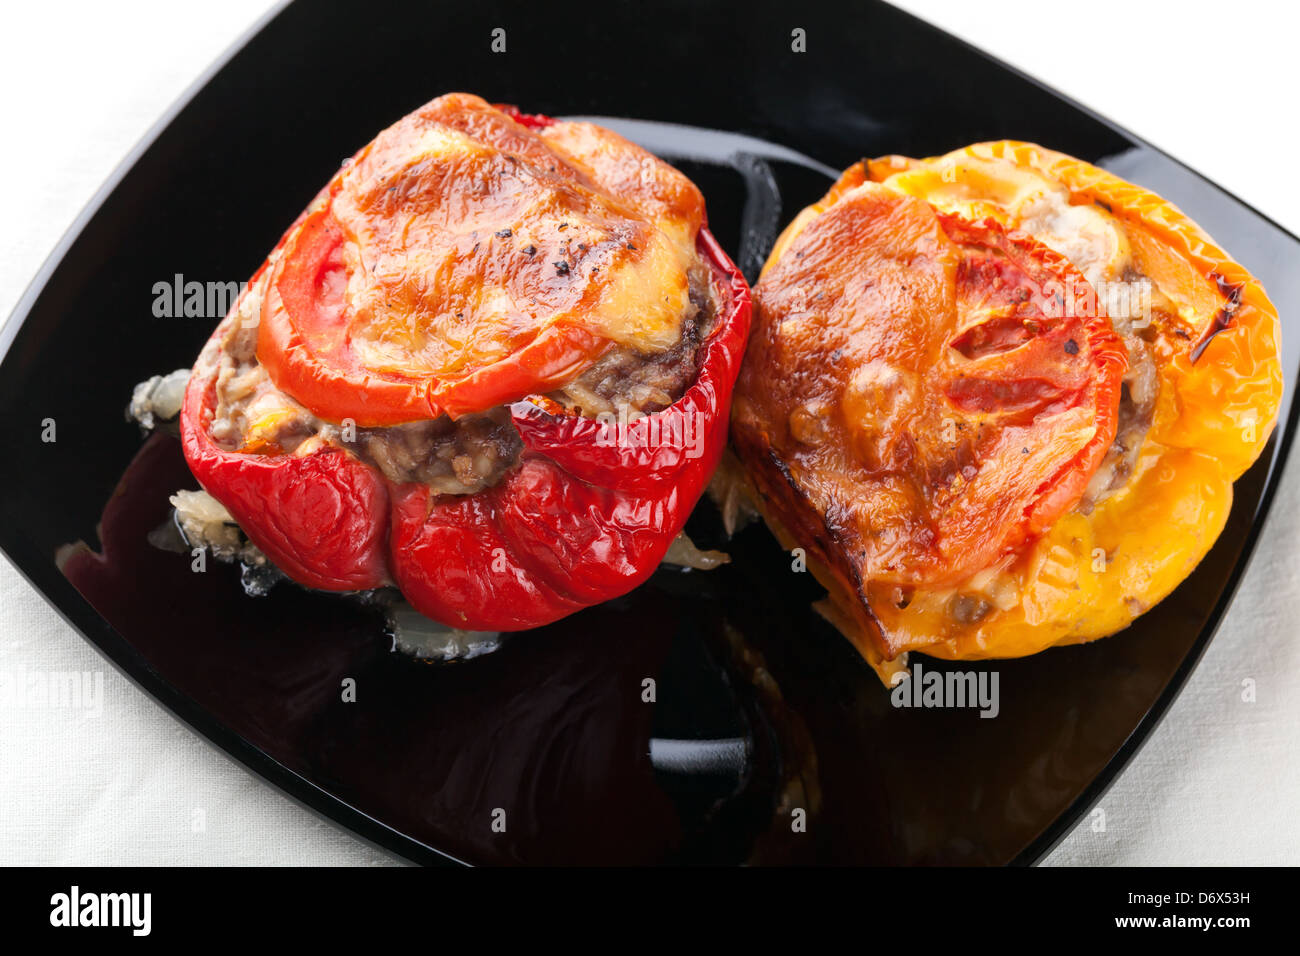 Two stuffed bell peppers with chopped meat, cheese and tomato on black plate Stock Photo